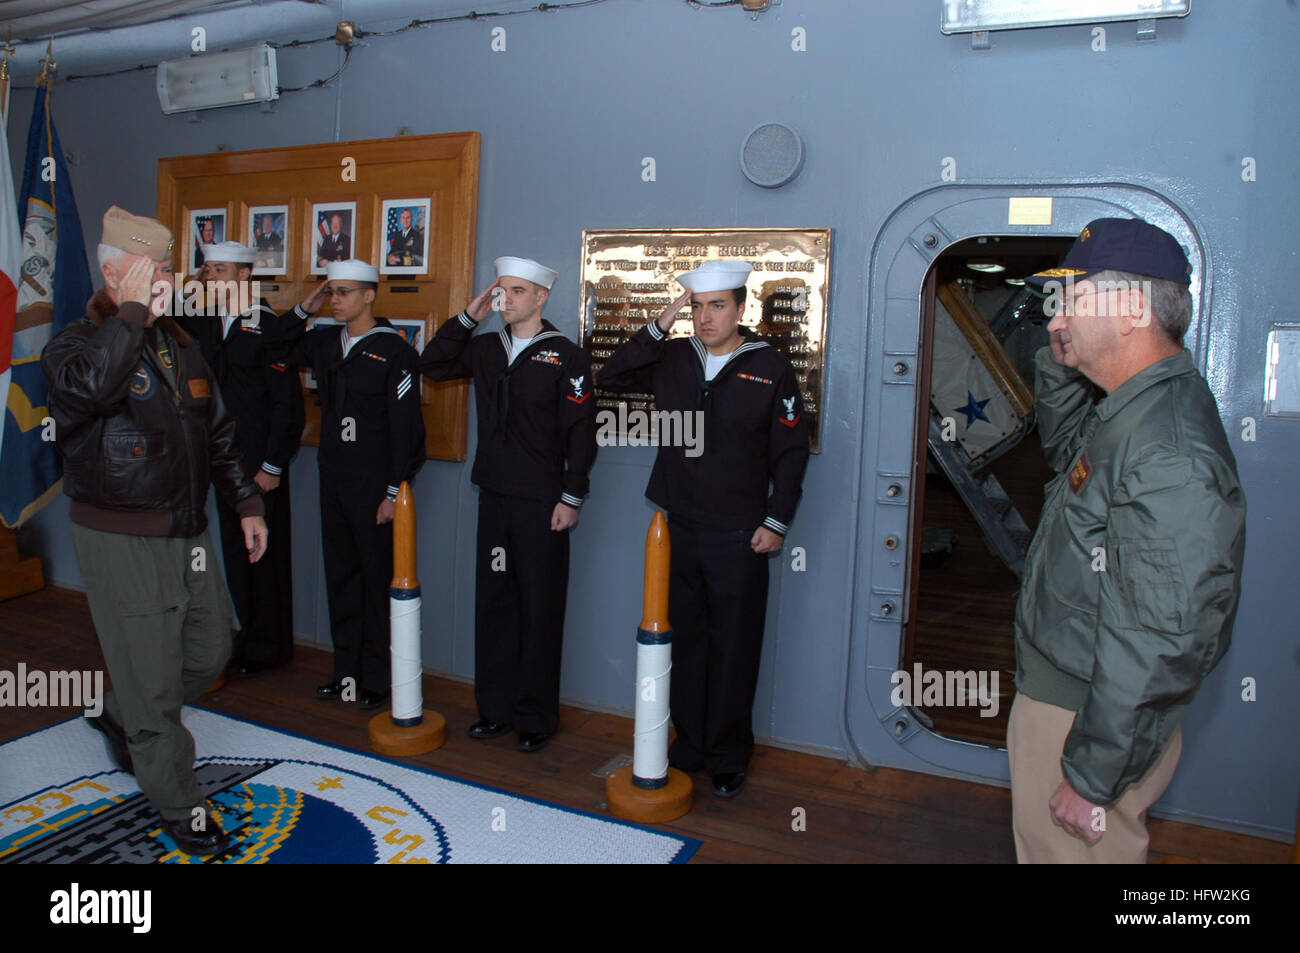 071108-N-2746V-003 YOKOSUKA, Japan (Nov. 8, 2007) - Adm. Timothy Keating, commander of U.S. Pacific Command, walks through the sideboys to meet Vice Adm. Doug Crowder, commander of U.S. 7th Fleet, aboard the 7th Fleet flagship, USS Blue Ridge (LCC 19). Keating was in Yokosuka during a brief tour of assets in the Pacific. U.S. Navy photo by Mass Communication Specialist 2nd Class Adam Vernon (RELEASED) US Navy 071108-N-2746V-003 Adm. Timothy Keating, commander of U.S. Pacific Command, walks through the sideboys to meet Vice Adm. Doug Crowder, commander of U.S. 7th Fleet, aboard the 7th Fleet fl Stock Photo